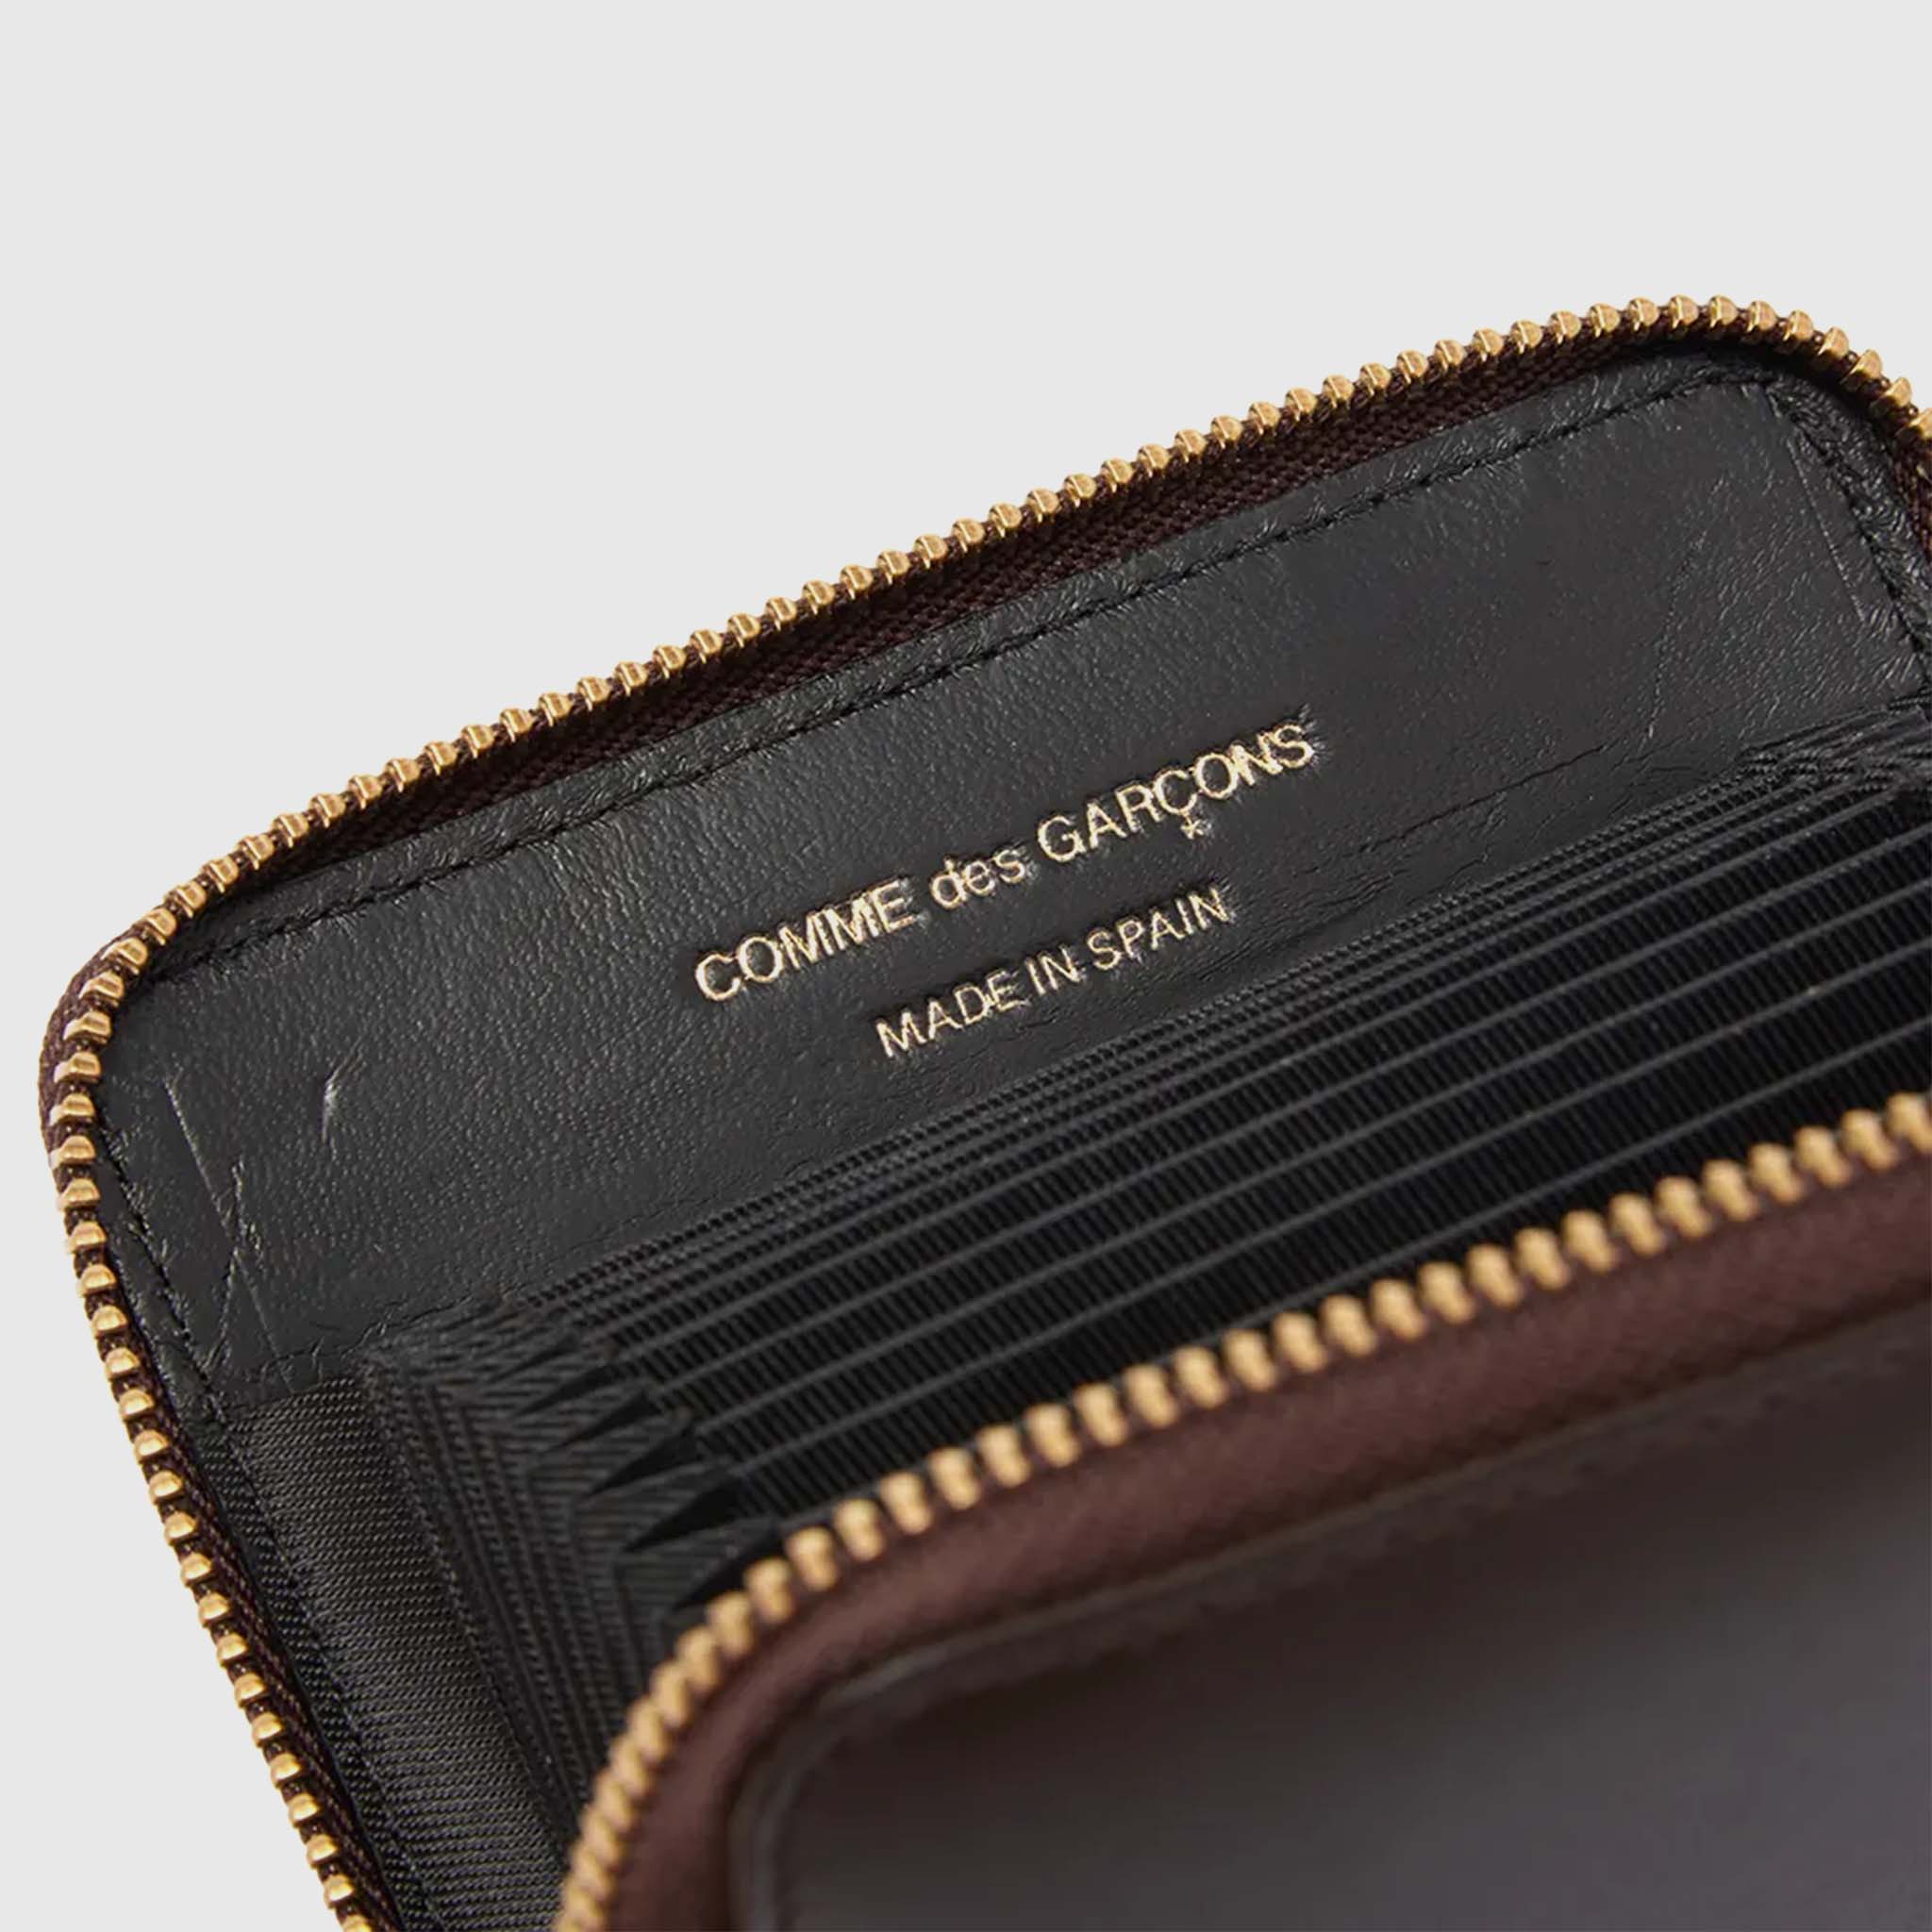 CLASSIC LEATHER WALLET